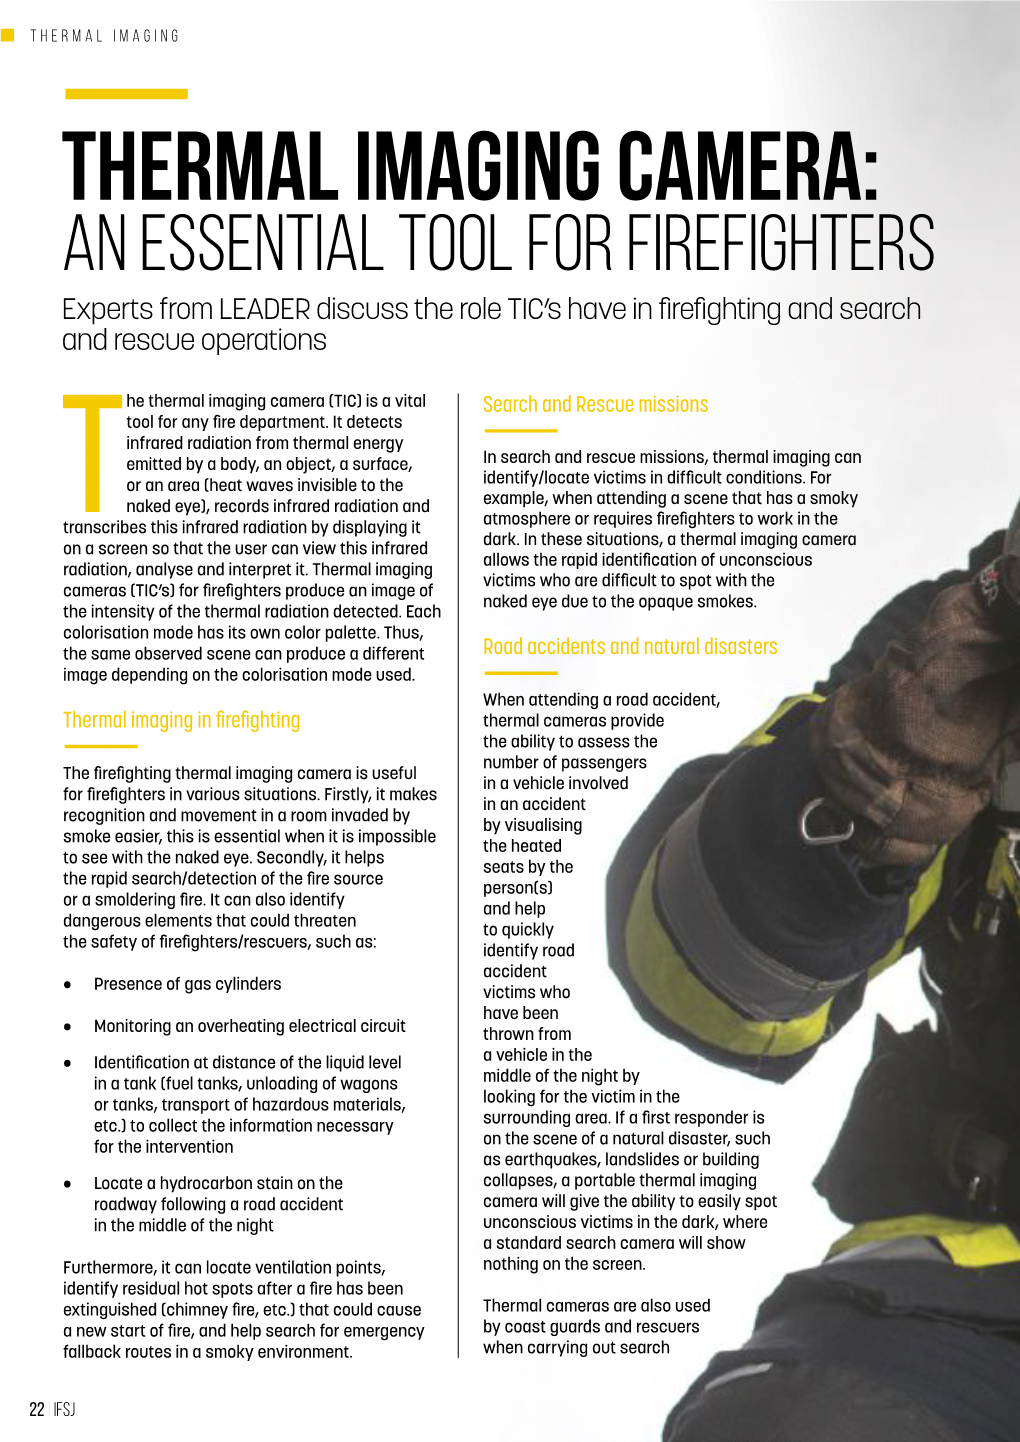 Thermal Imaging Camera: an Essential Tool for Firefighters Experts from LEADER Discuss the Role TIC’S Have in Firefighting and Search and Rescue Operations